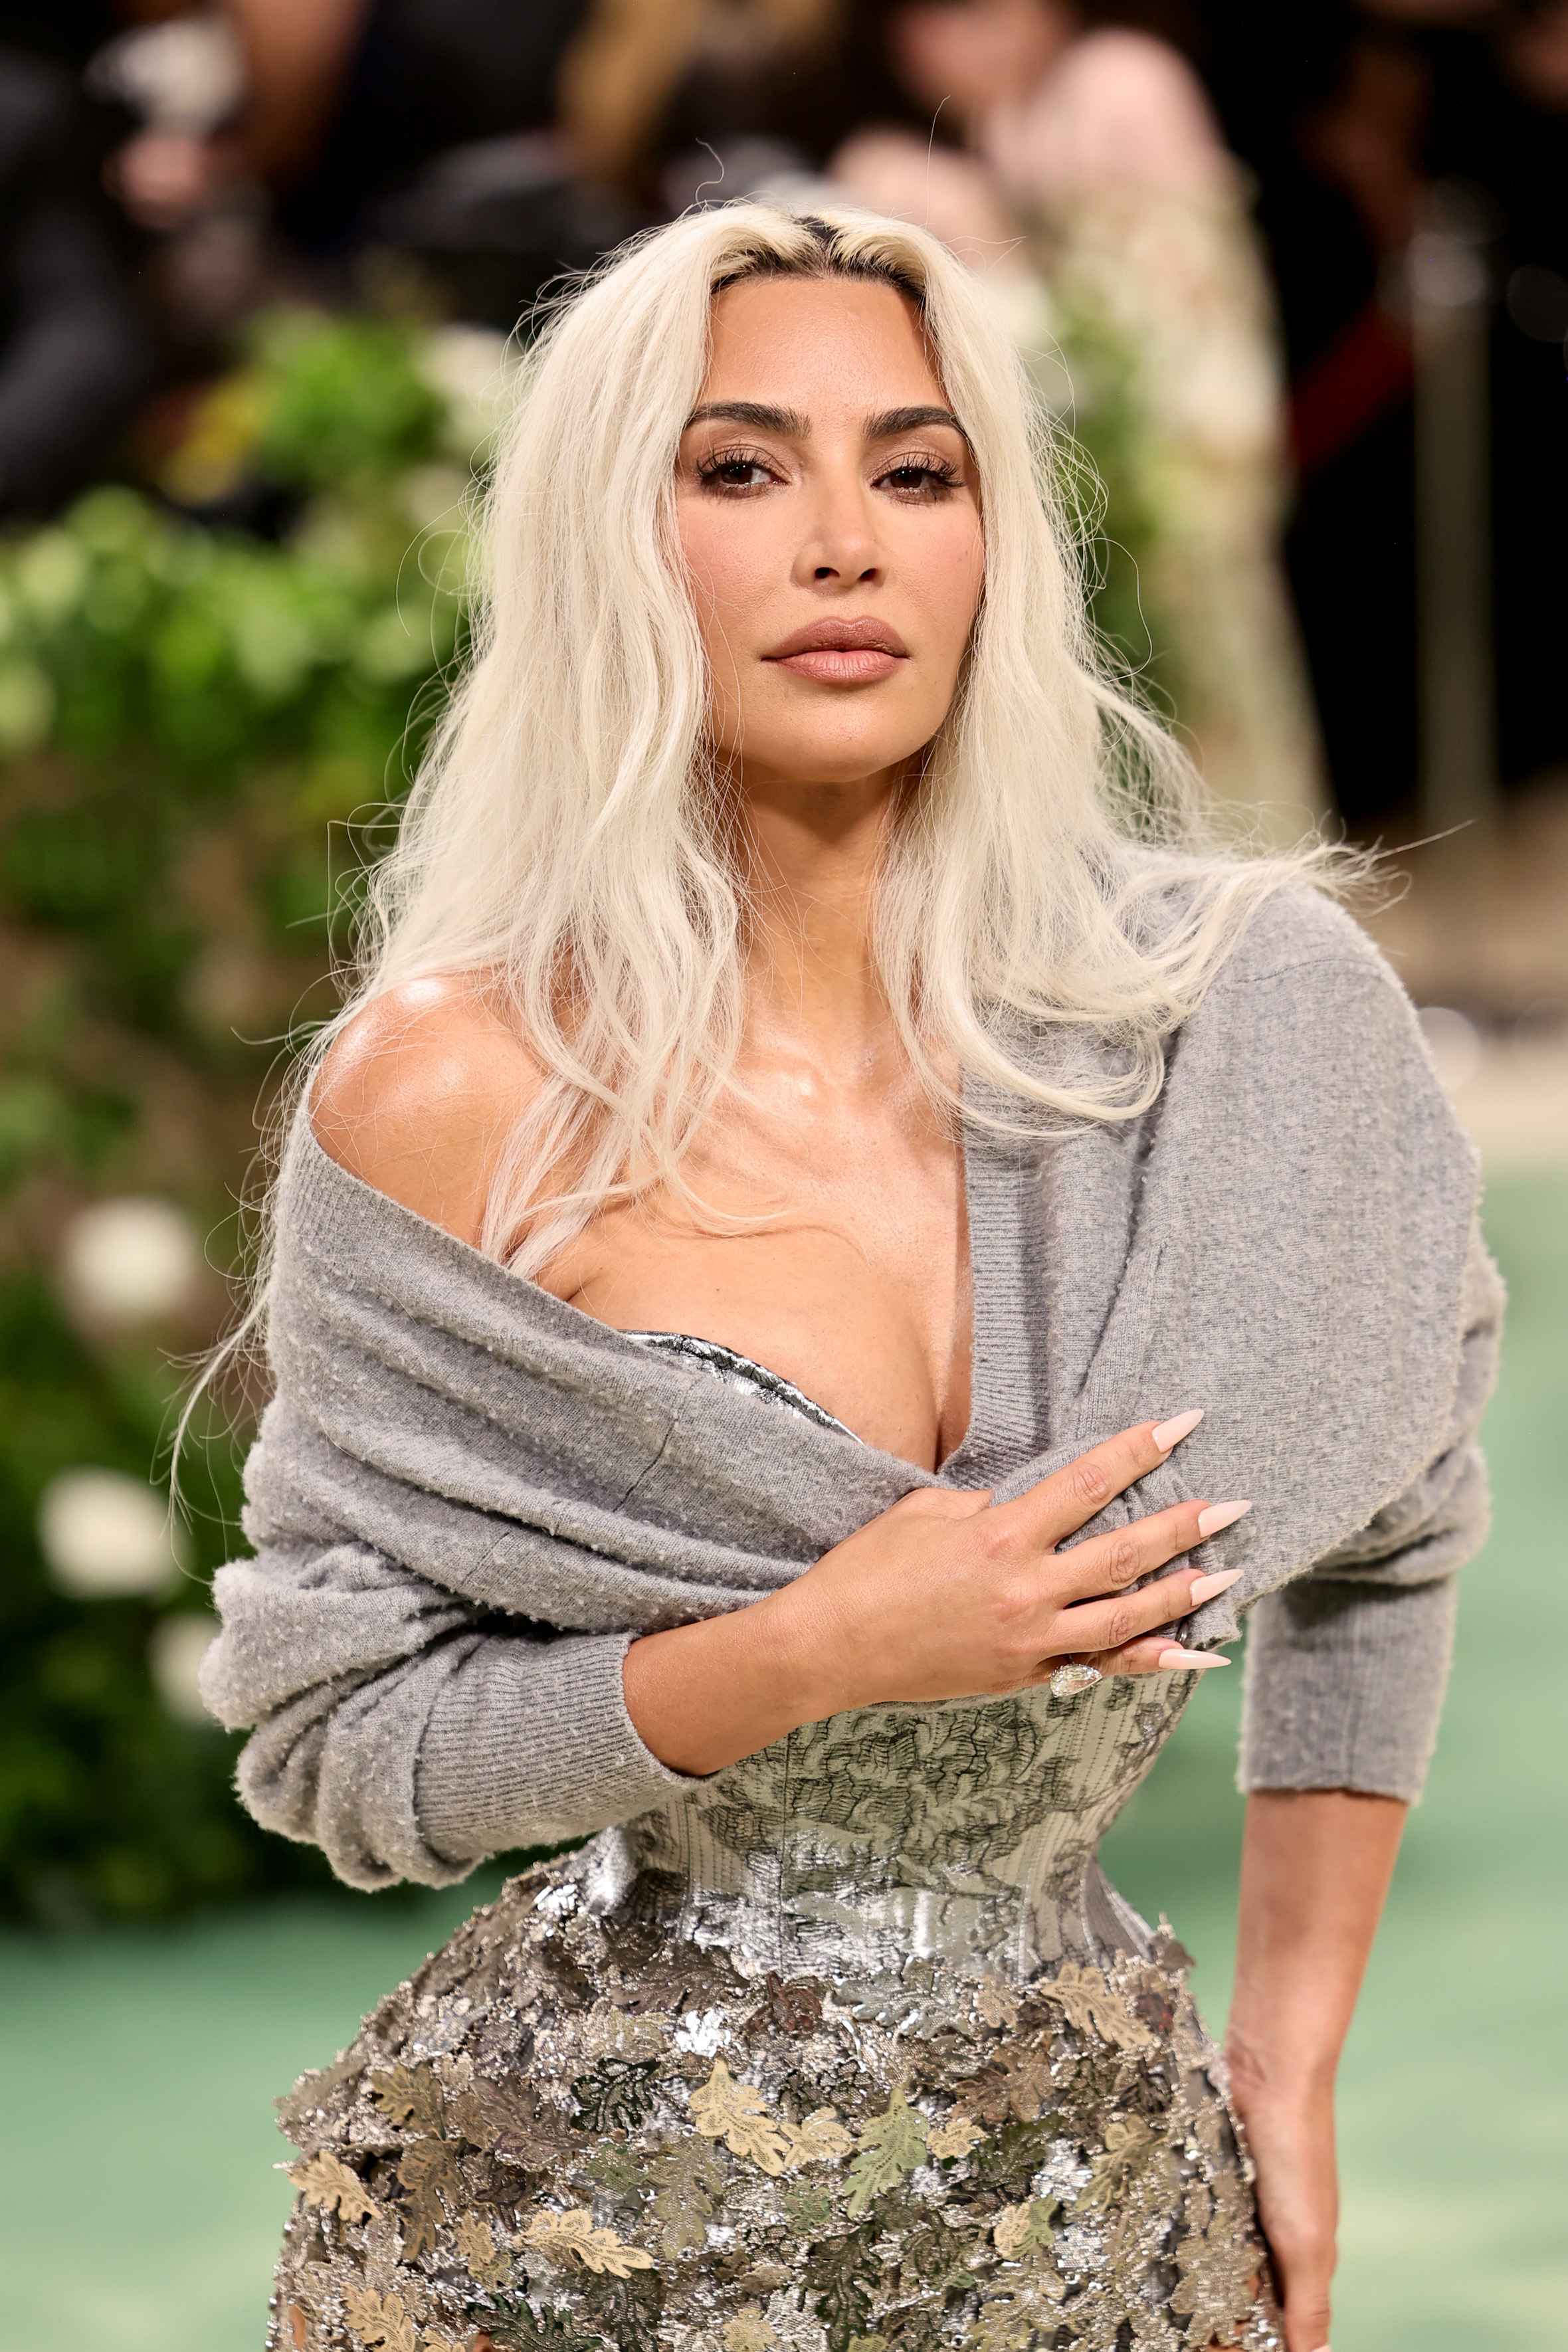 Kim Kardashian posing in a grey top with silver details, hand on chest, at an event